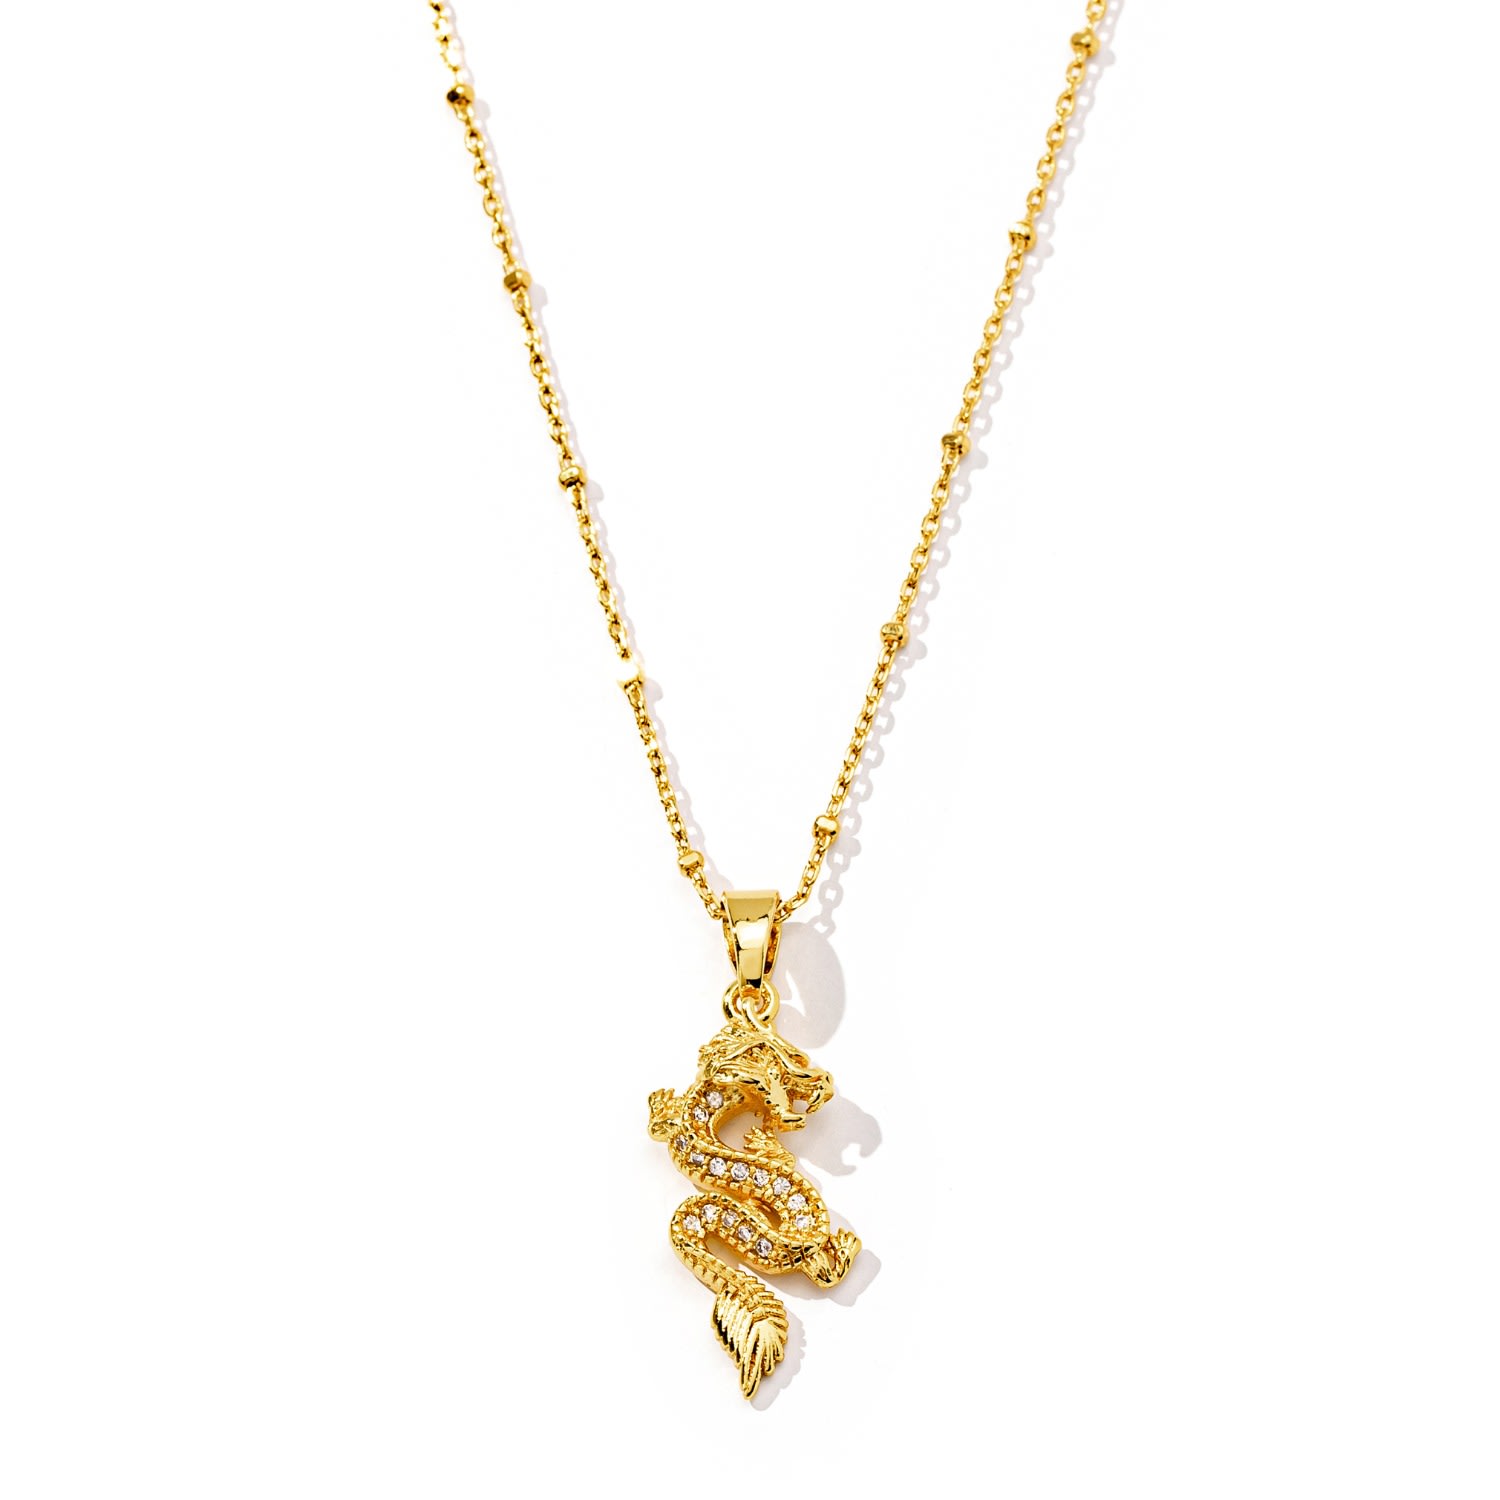 Women's Gold Dragon Pendant Necklace The Essential Jewels